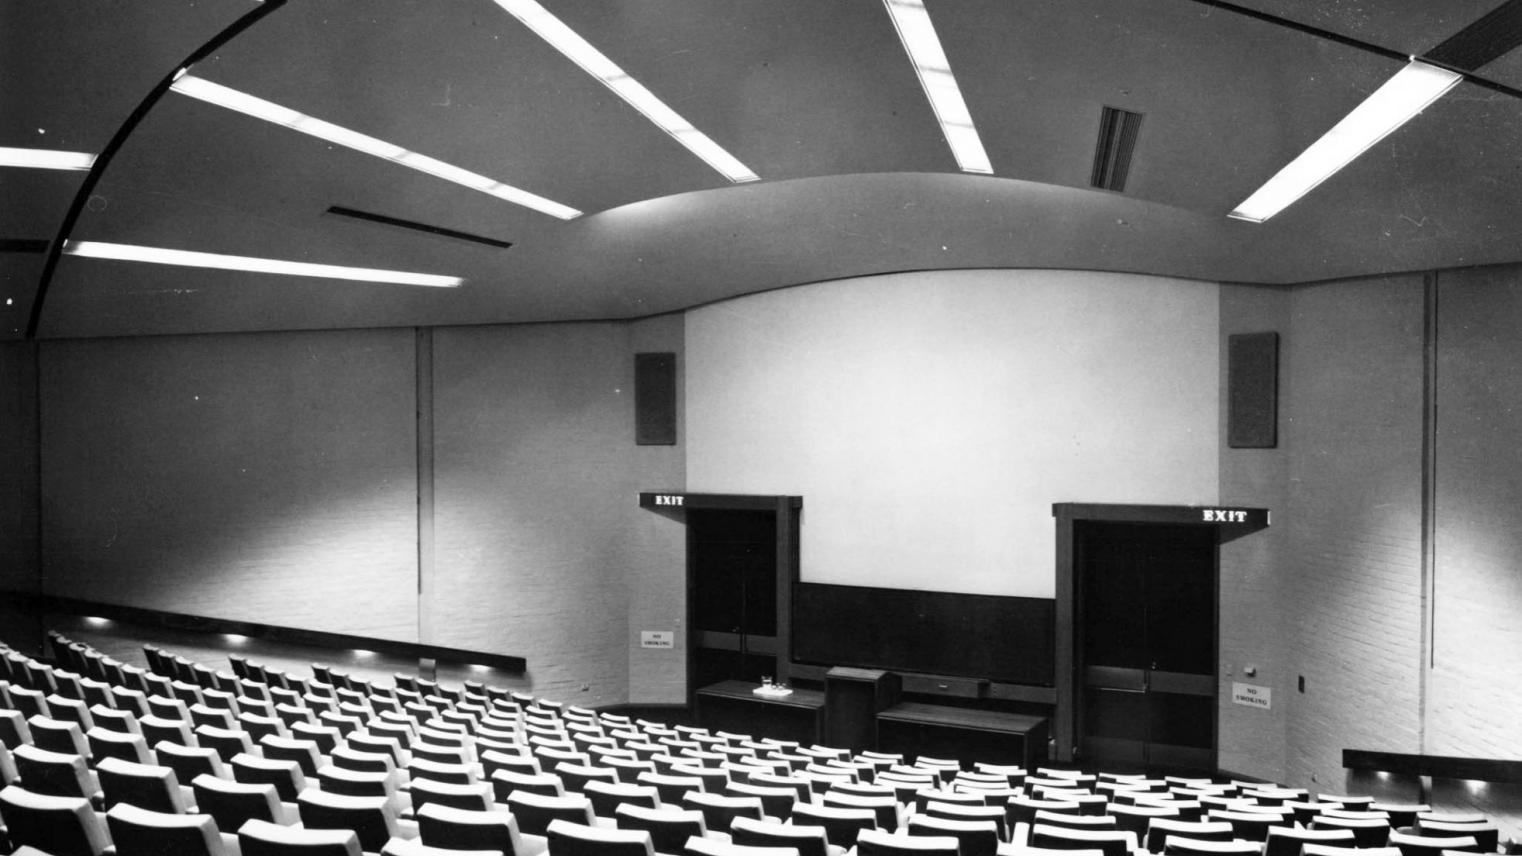 HC Coombs Lecture Theatre, undated (ANUA226-411-29)